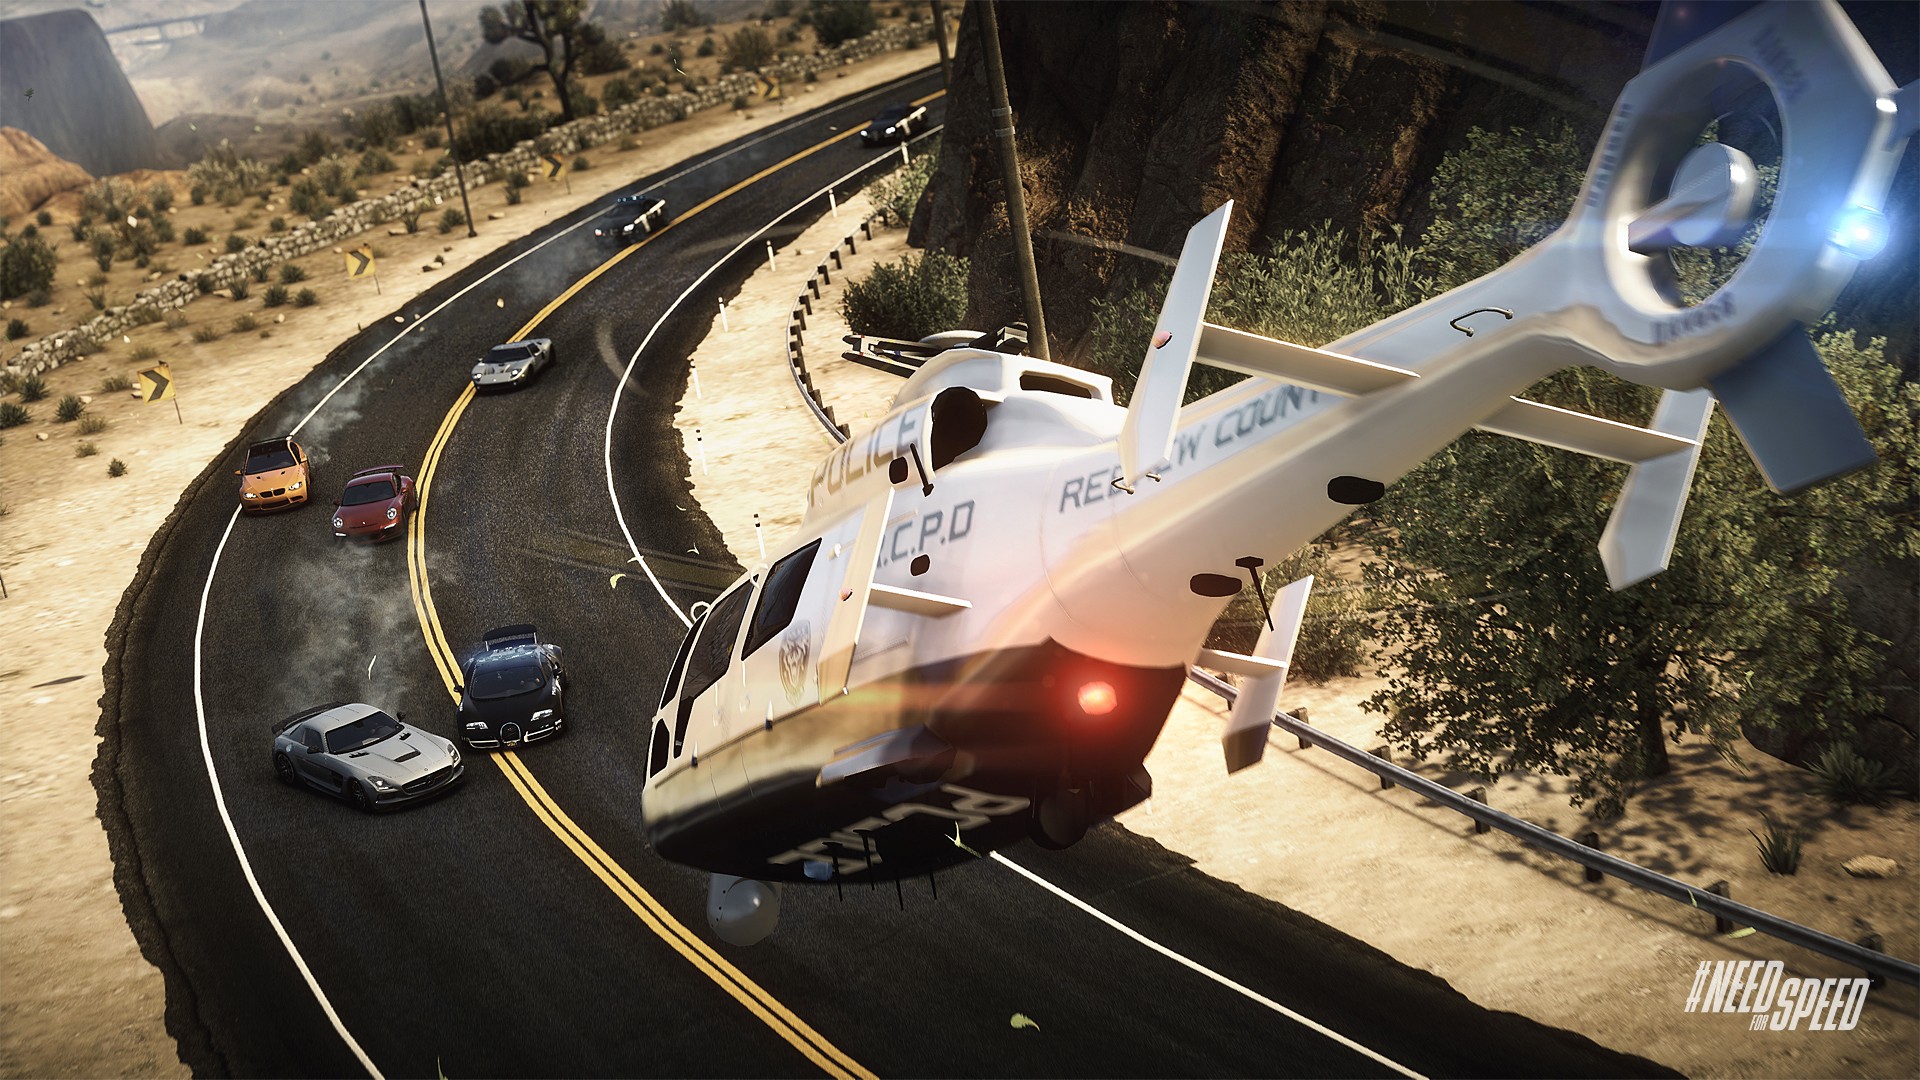 Nfs Most Wanted Save Game With Helicopter